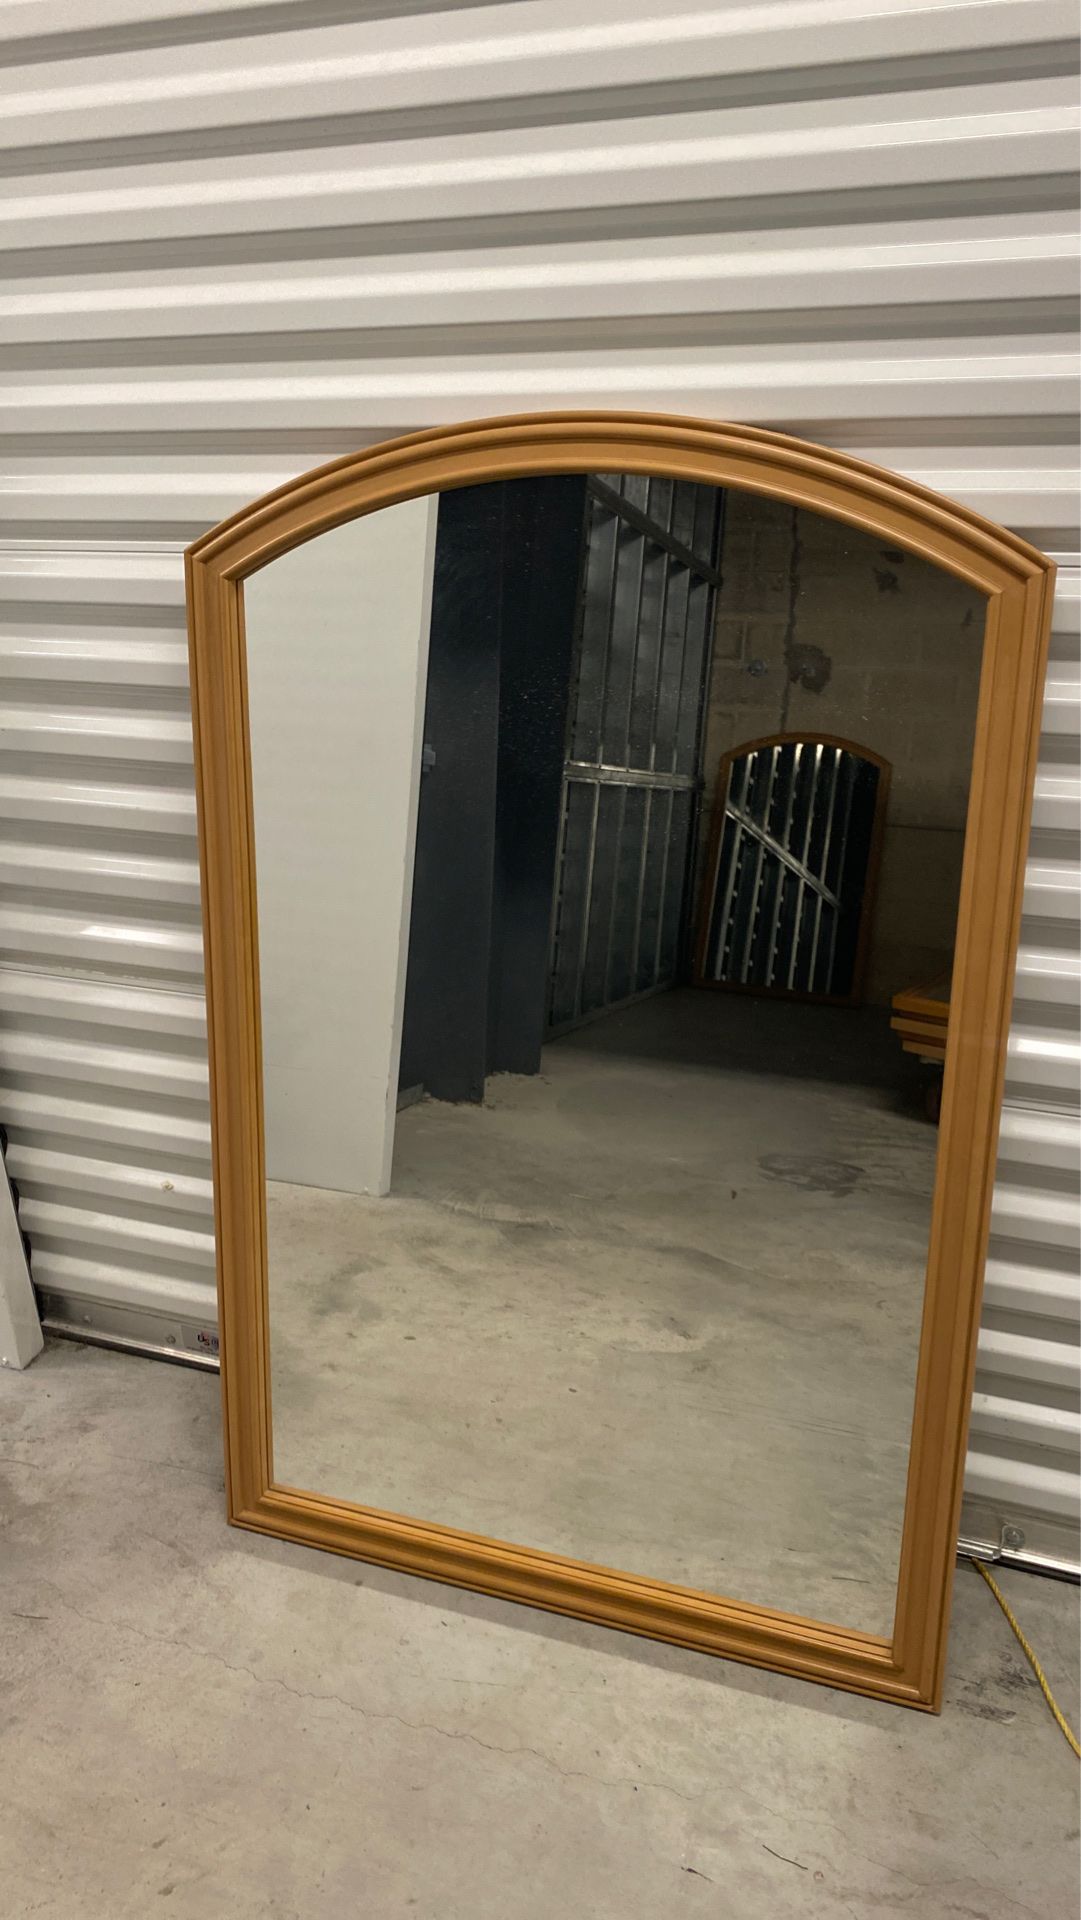 Wall mirrors 32 inches by 4 feet tall